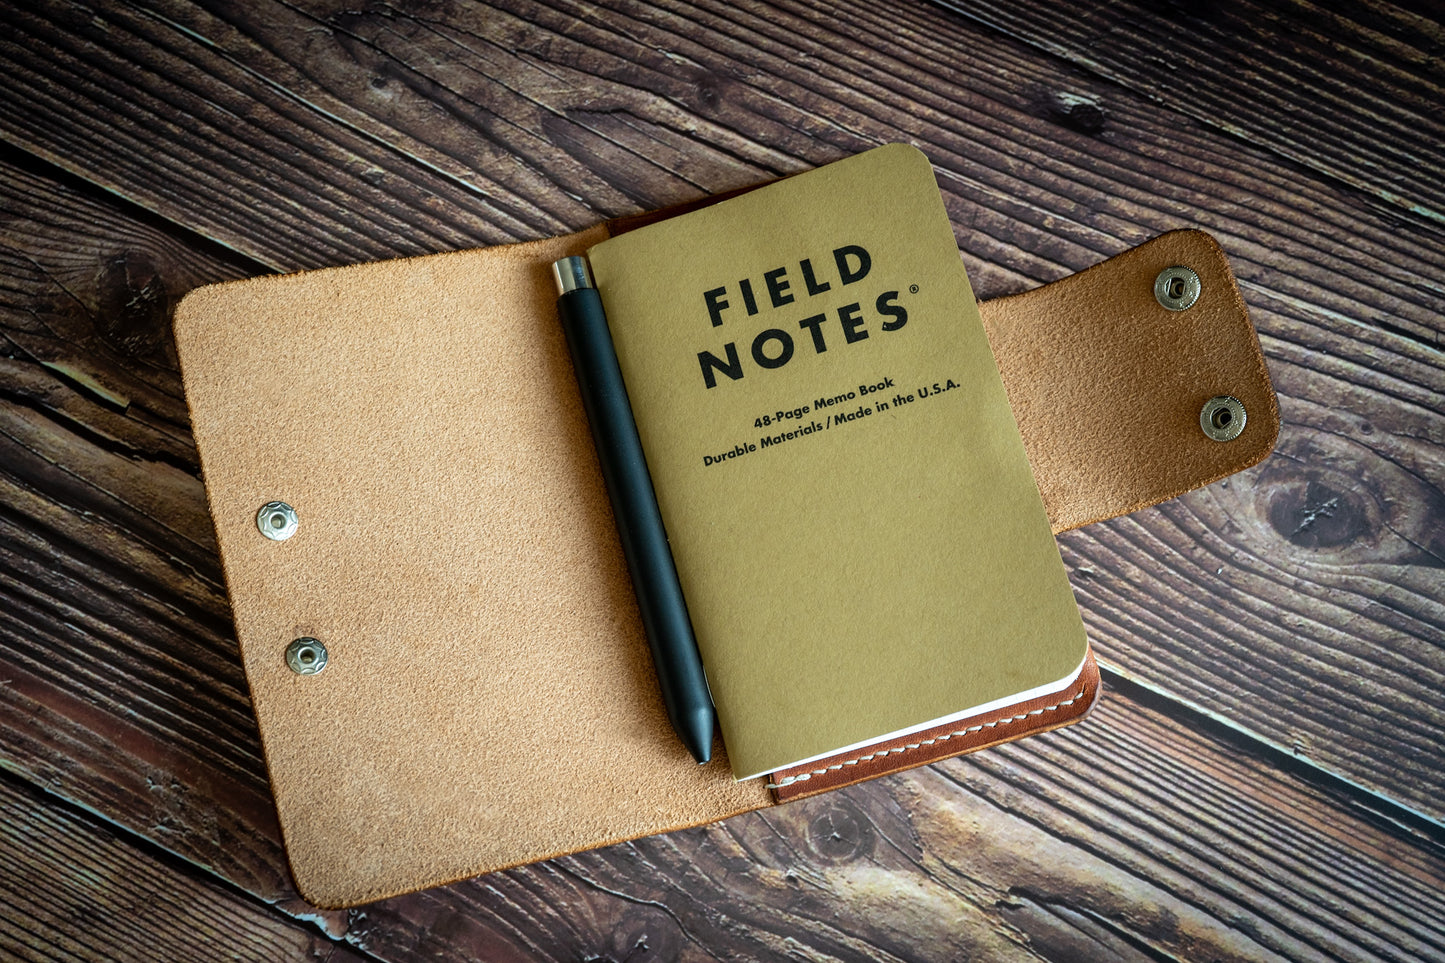 FN1 Field Notes leather cover opened up